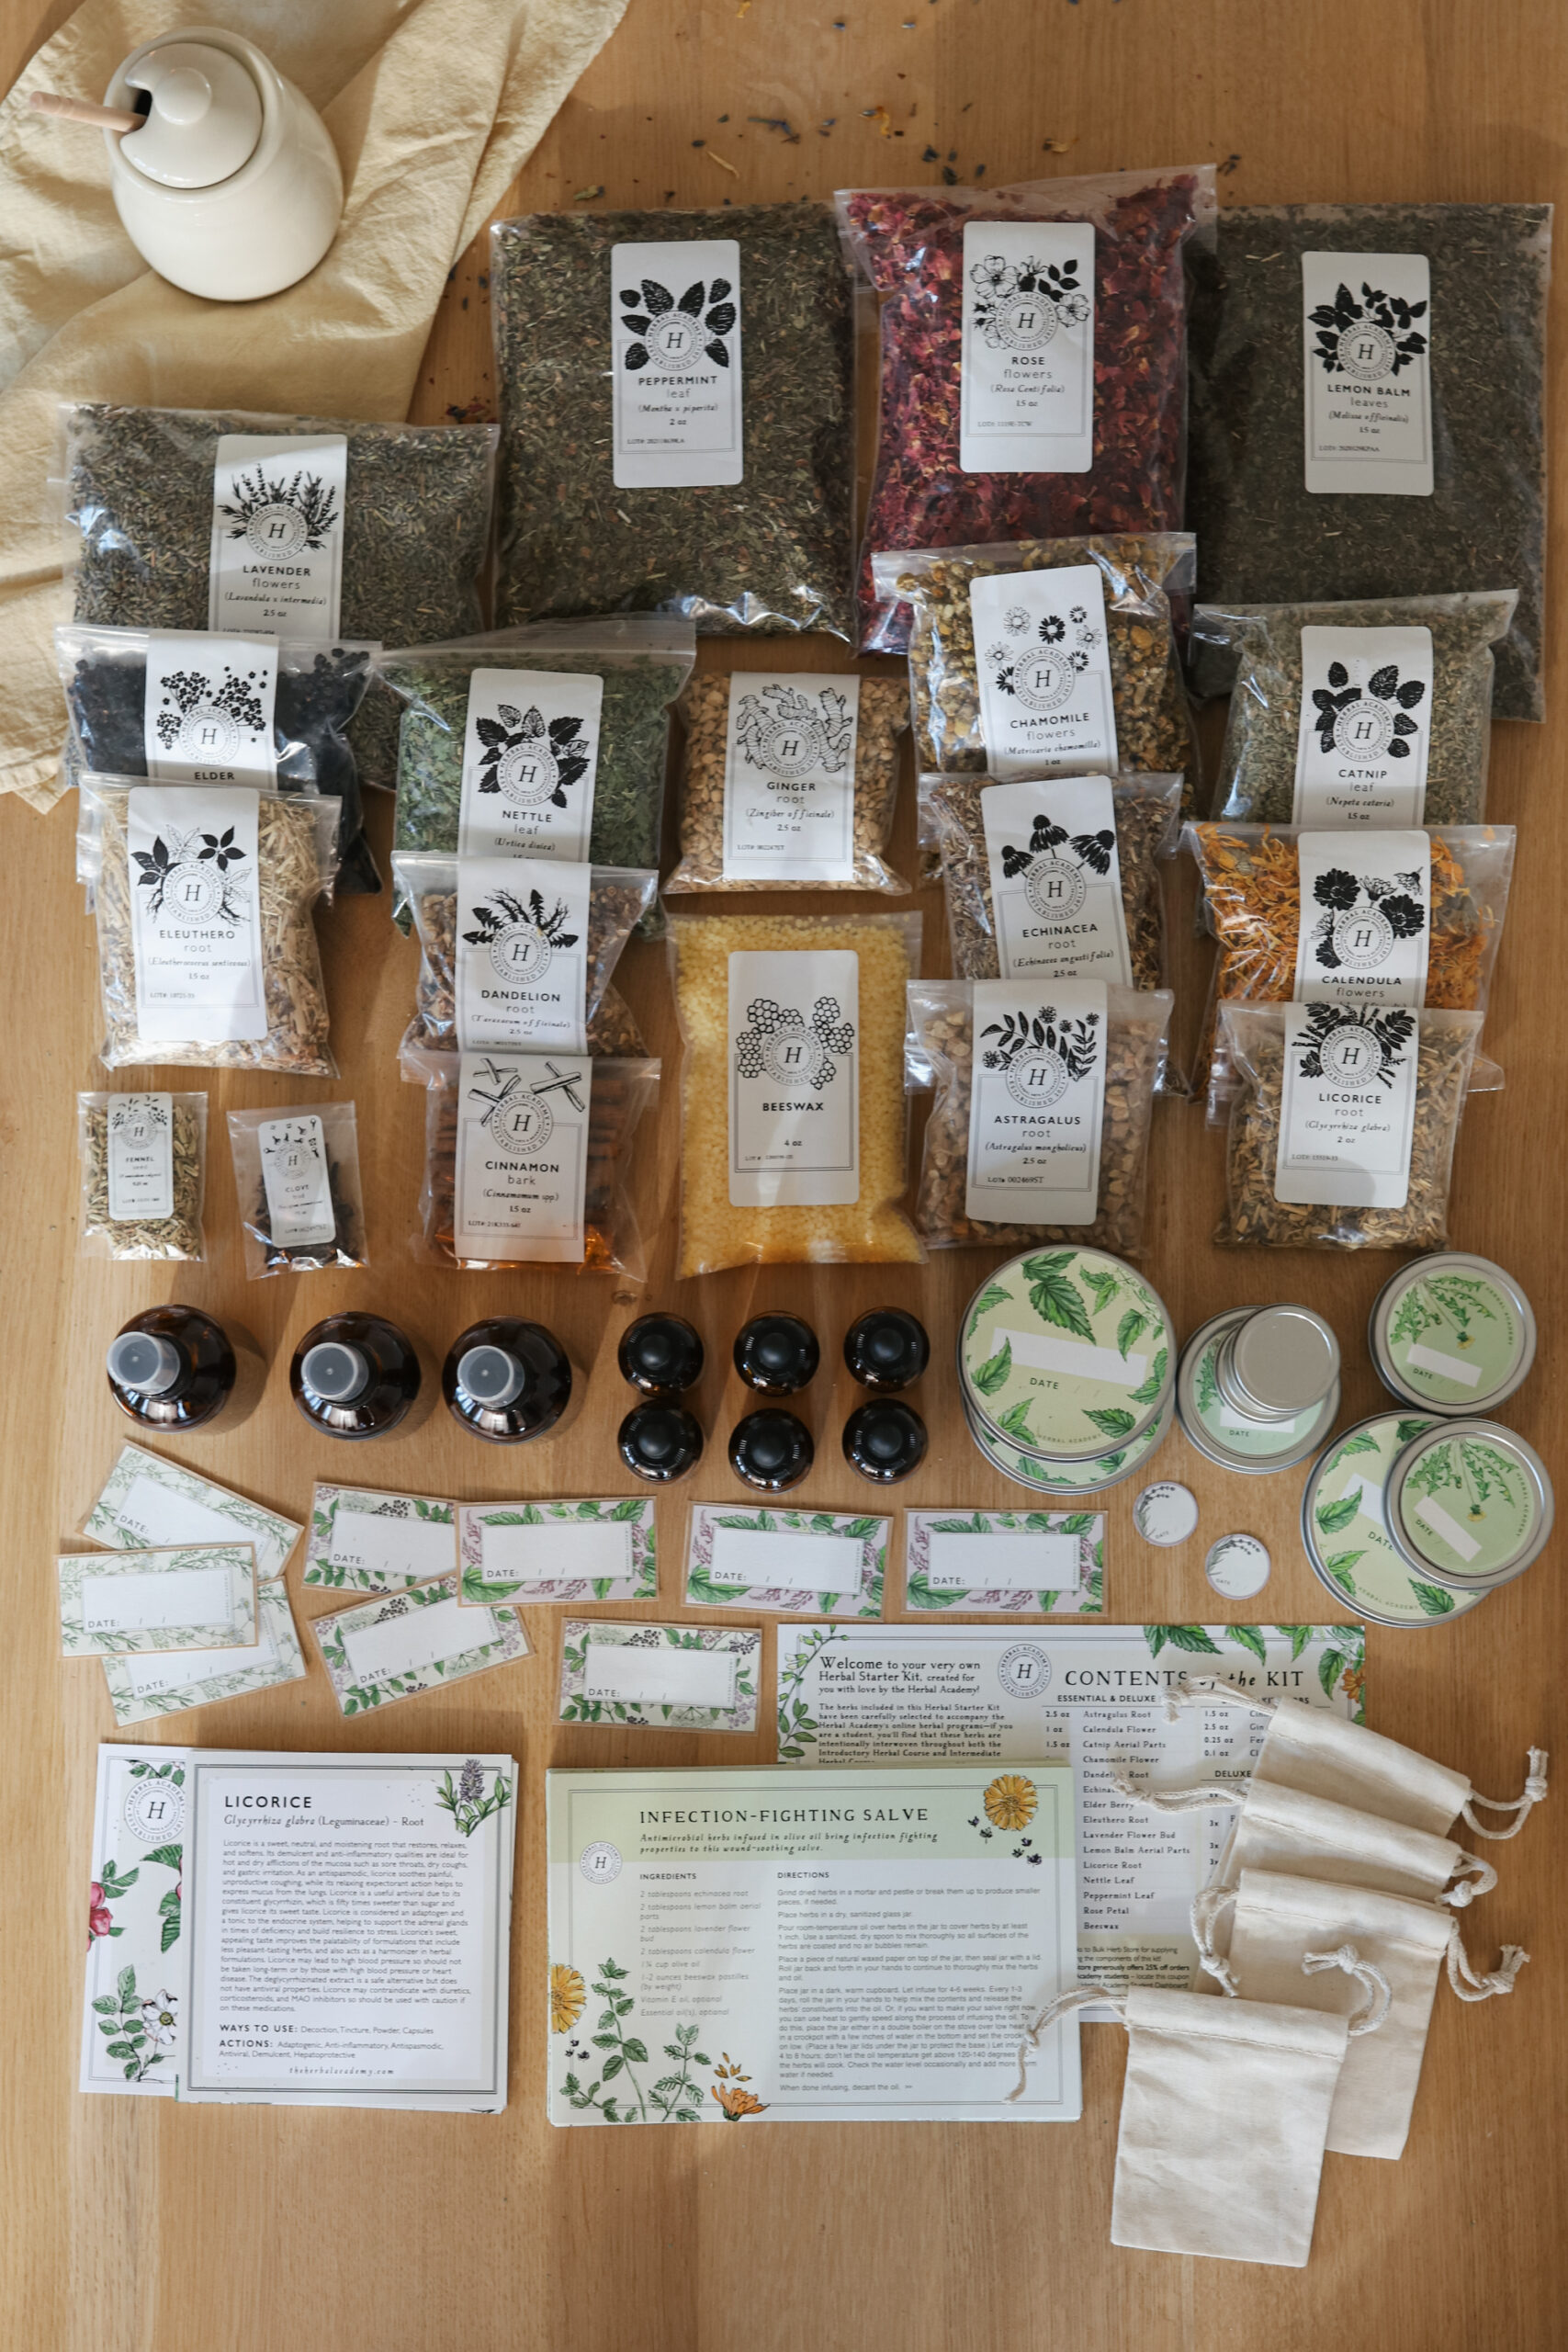 Herbal Academy Herbal Starter Kit - a complete kit to help you learn herbalism